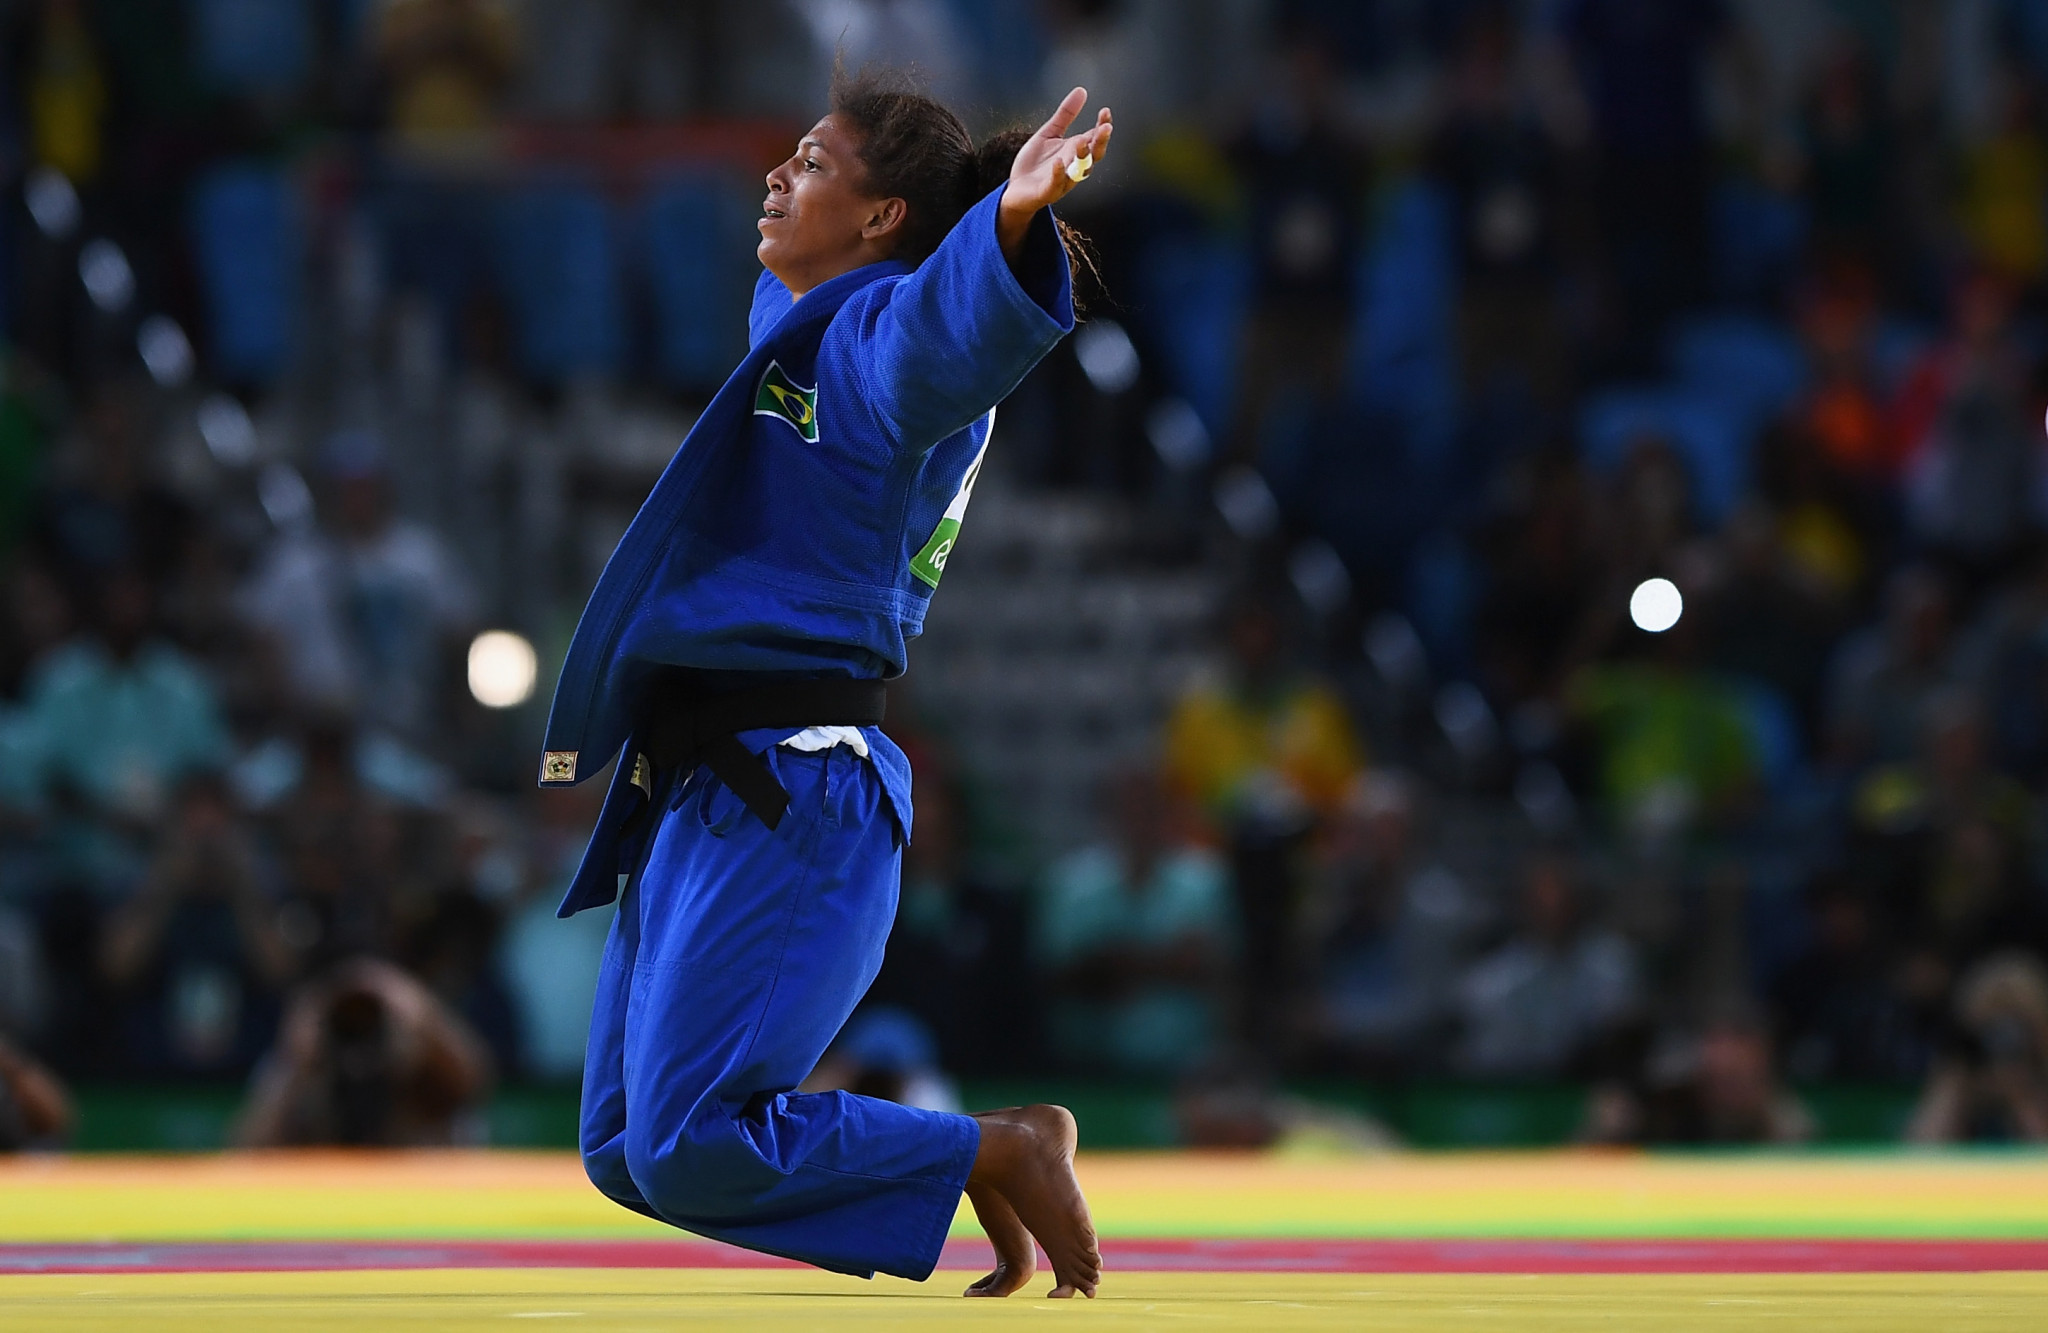 Rafaela Lopes Silva will miss Tokyo 2020 after she failed to have her two-year doping ban overturned ©Getty Images